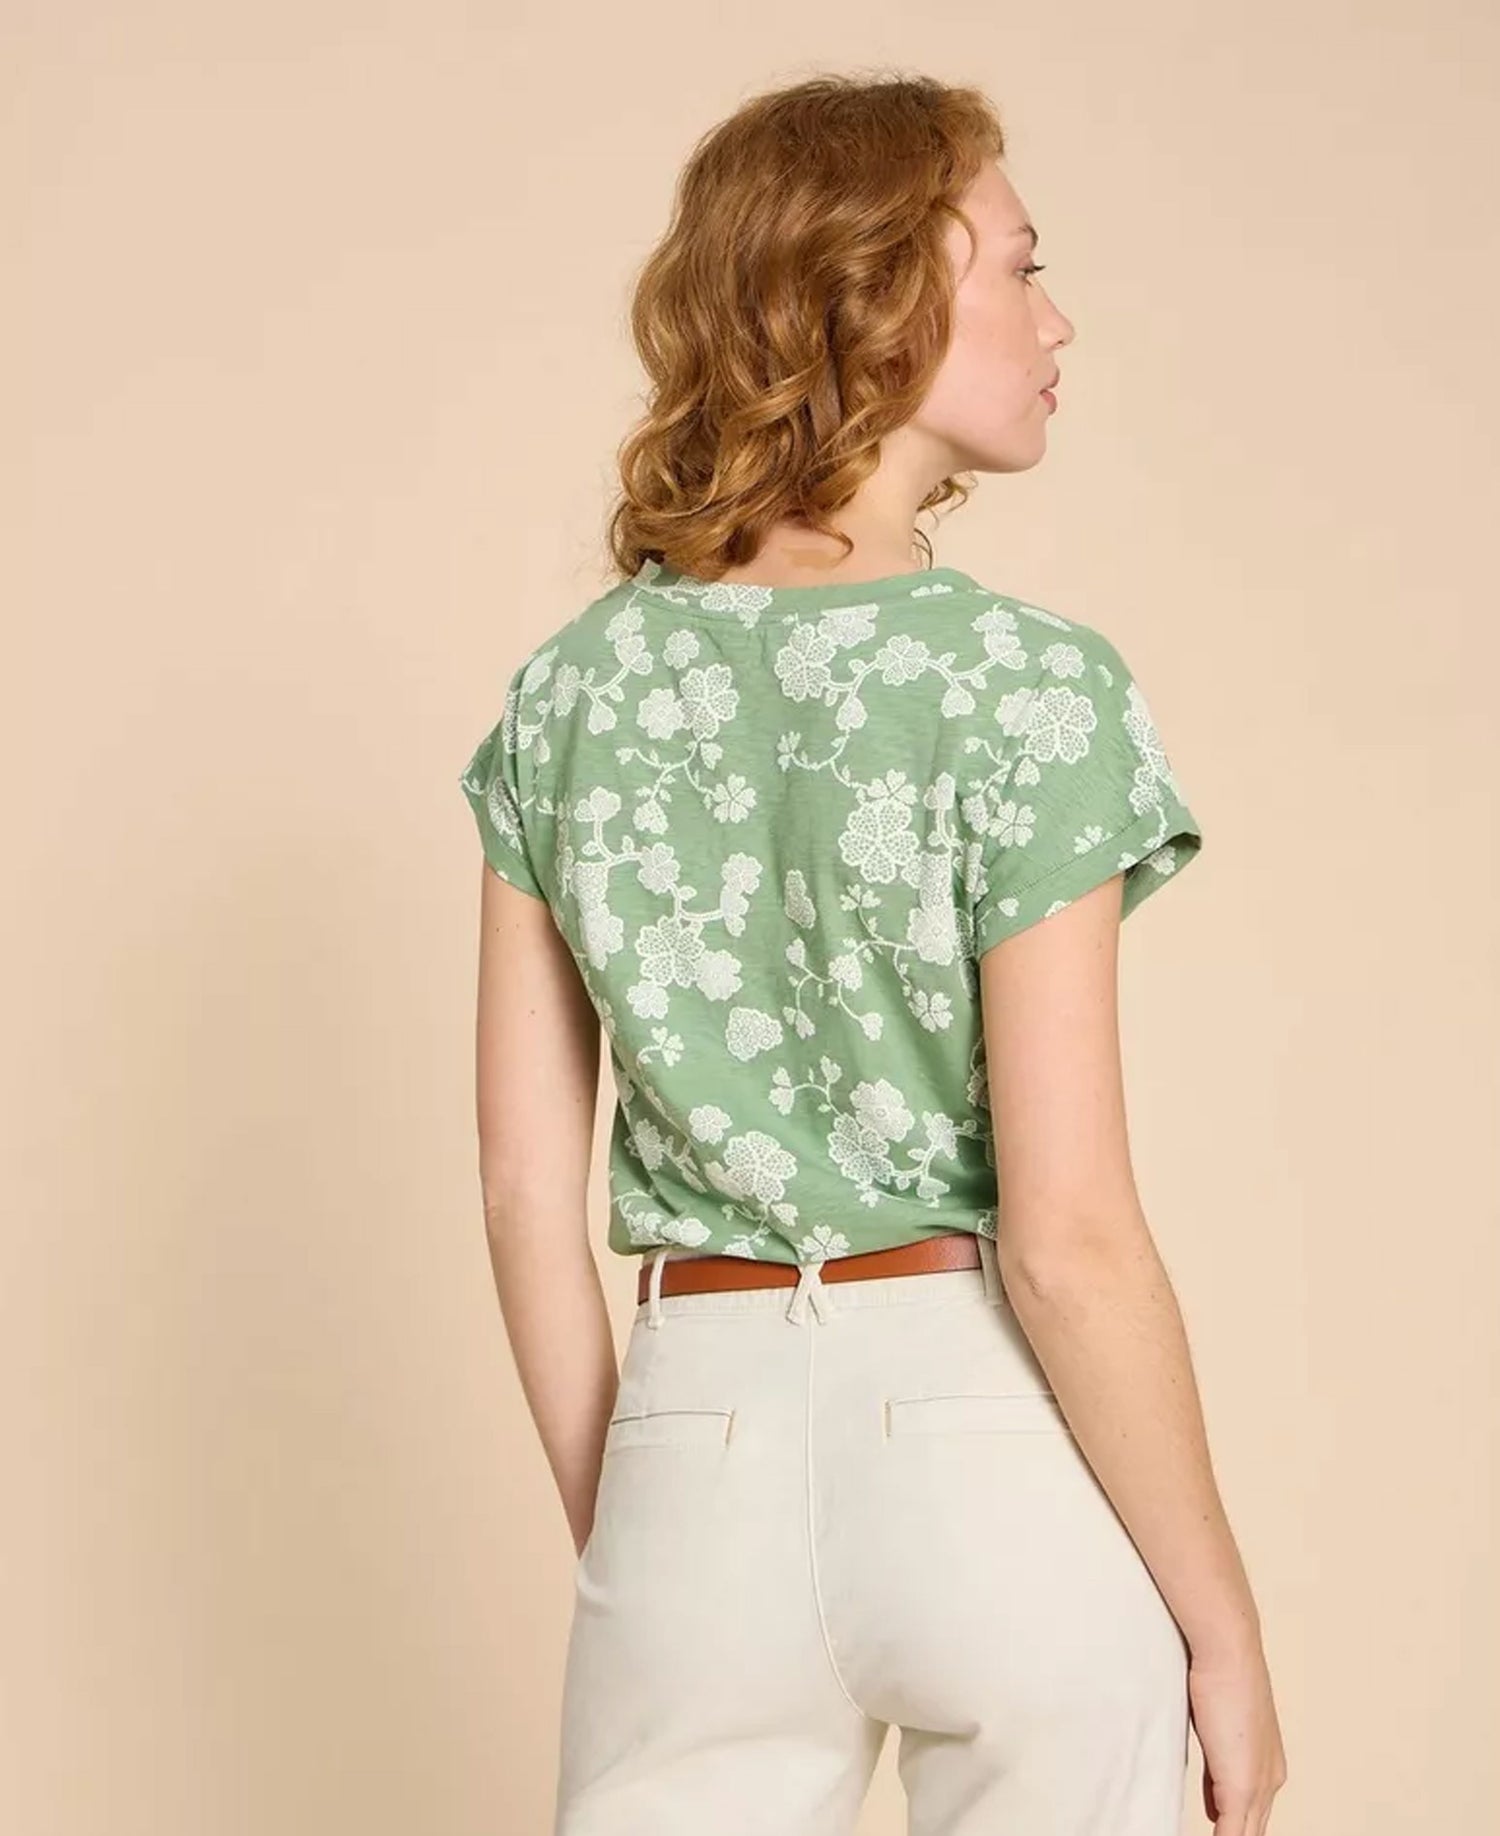 Nelly Notch Neck Cotton Tee - Green Print